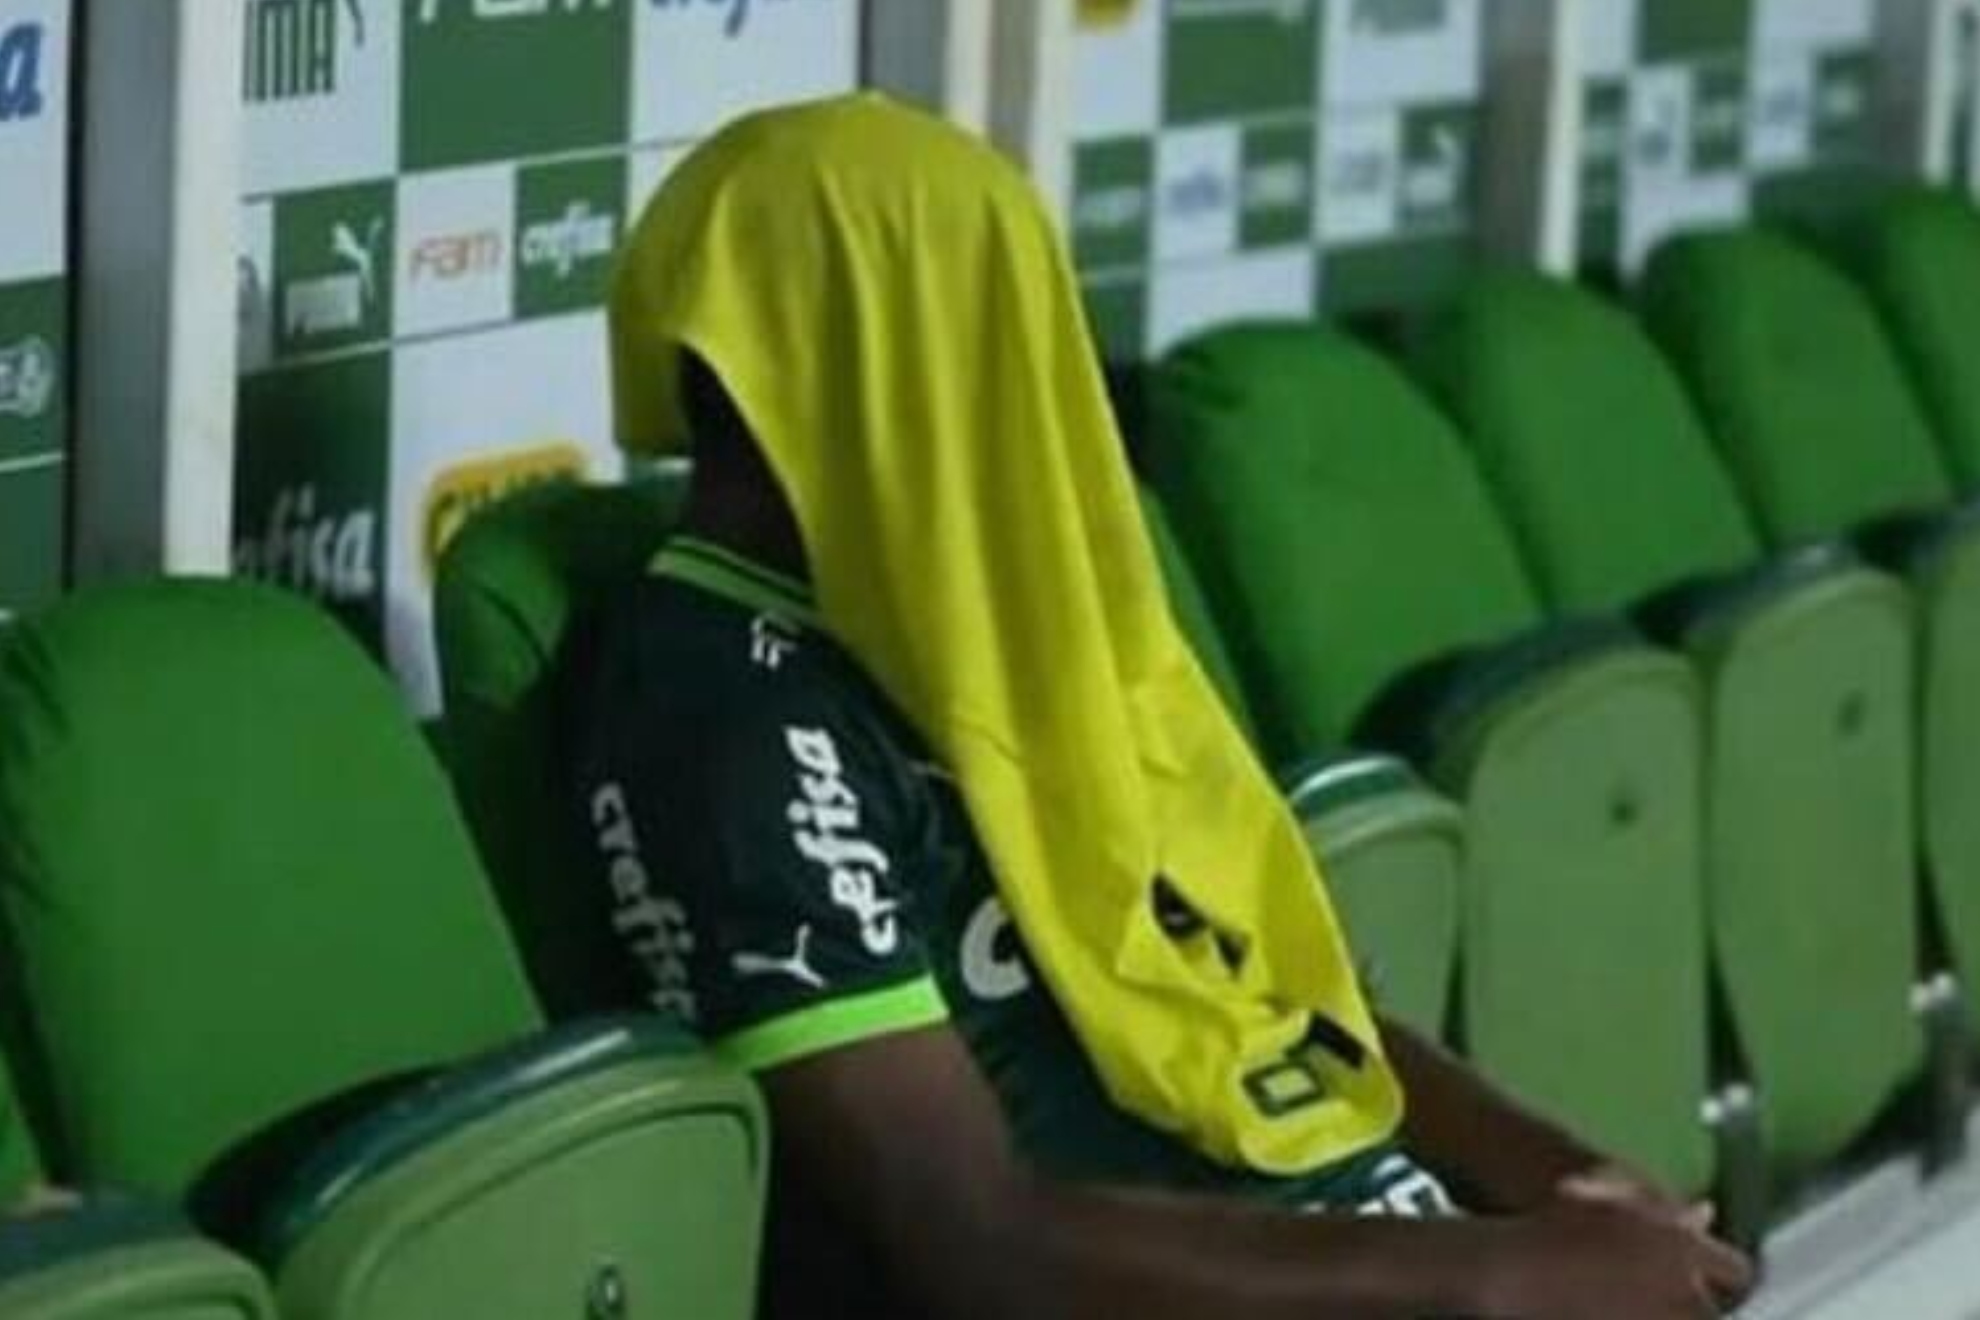 Endrick, Real Madrid's future star, breaks down in tears after another game without scoring in Brazil